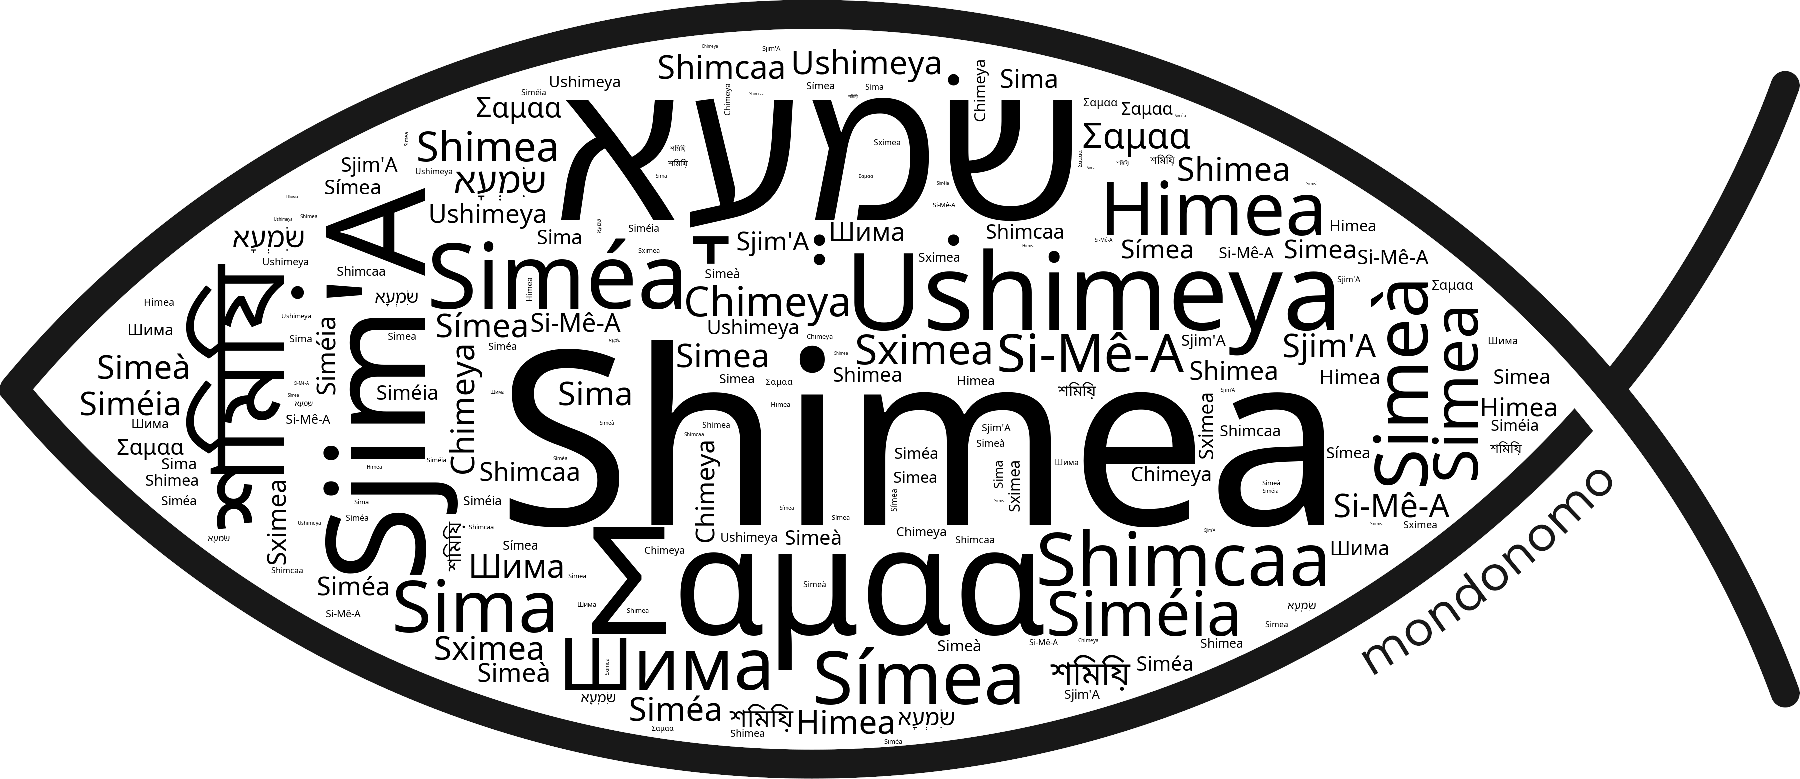 Name Shimea in the world's Bibles